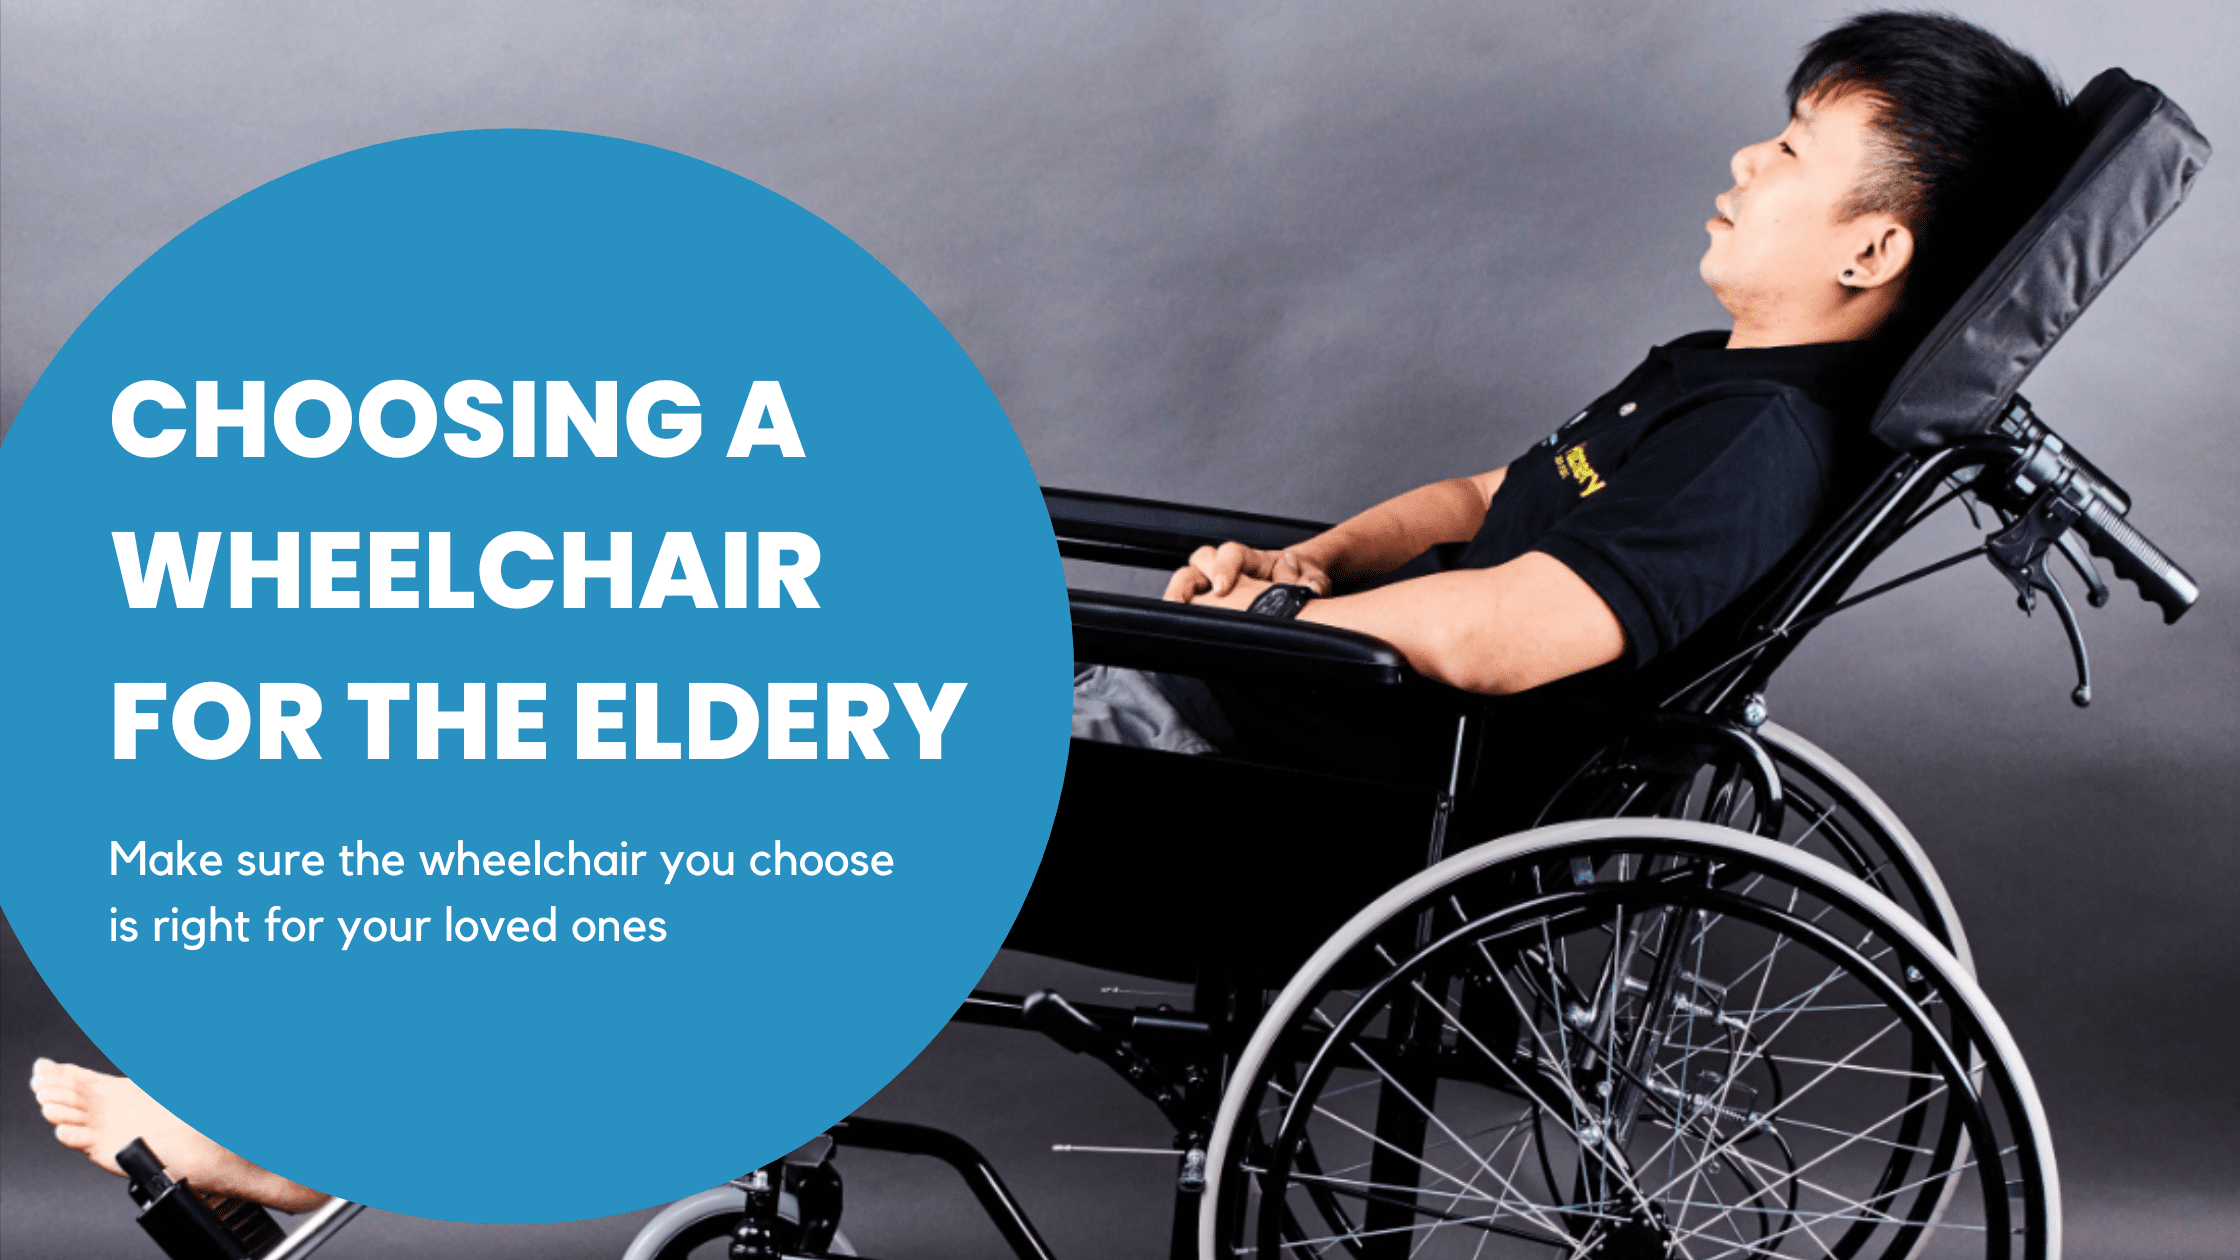 How to choose a wheelchair for the elderly